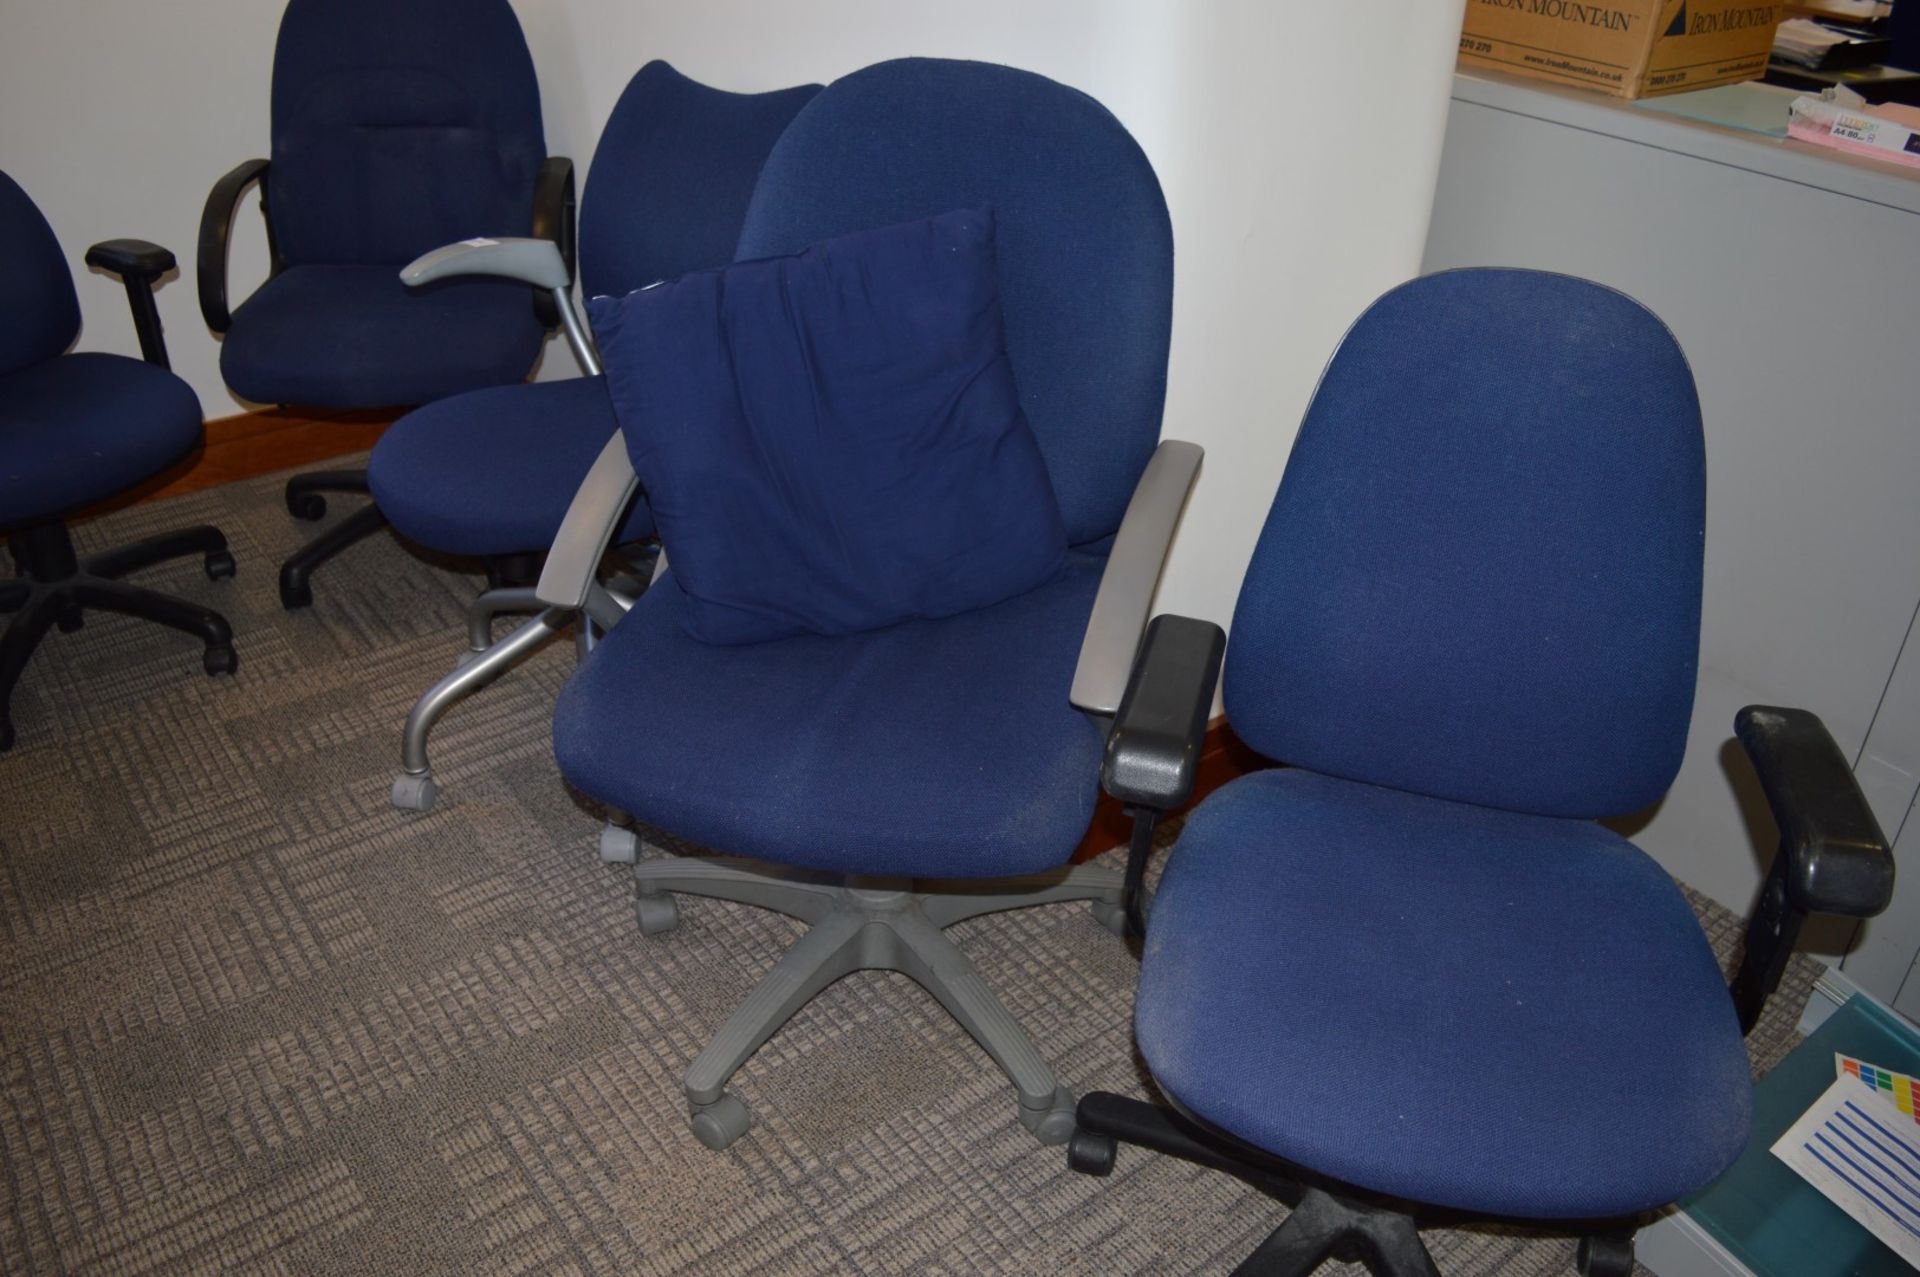 5 x Various Office Chairs - Blue Fabric Swivel Ergonomic Office Chairs - Various Conditions - Ref - Image 2 of 4